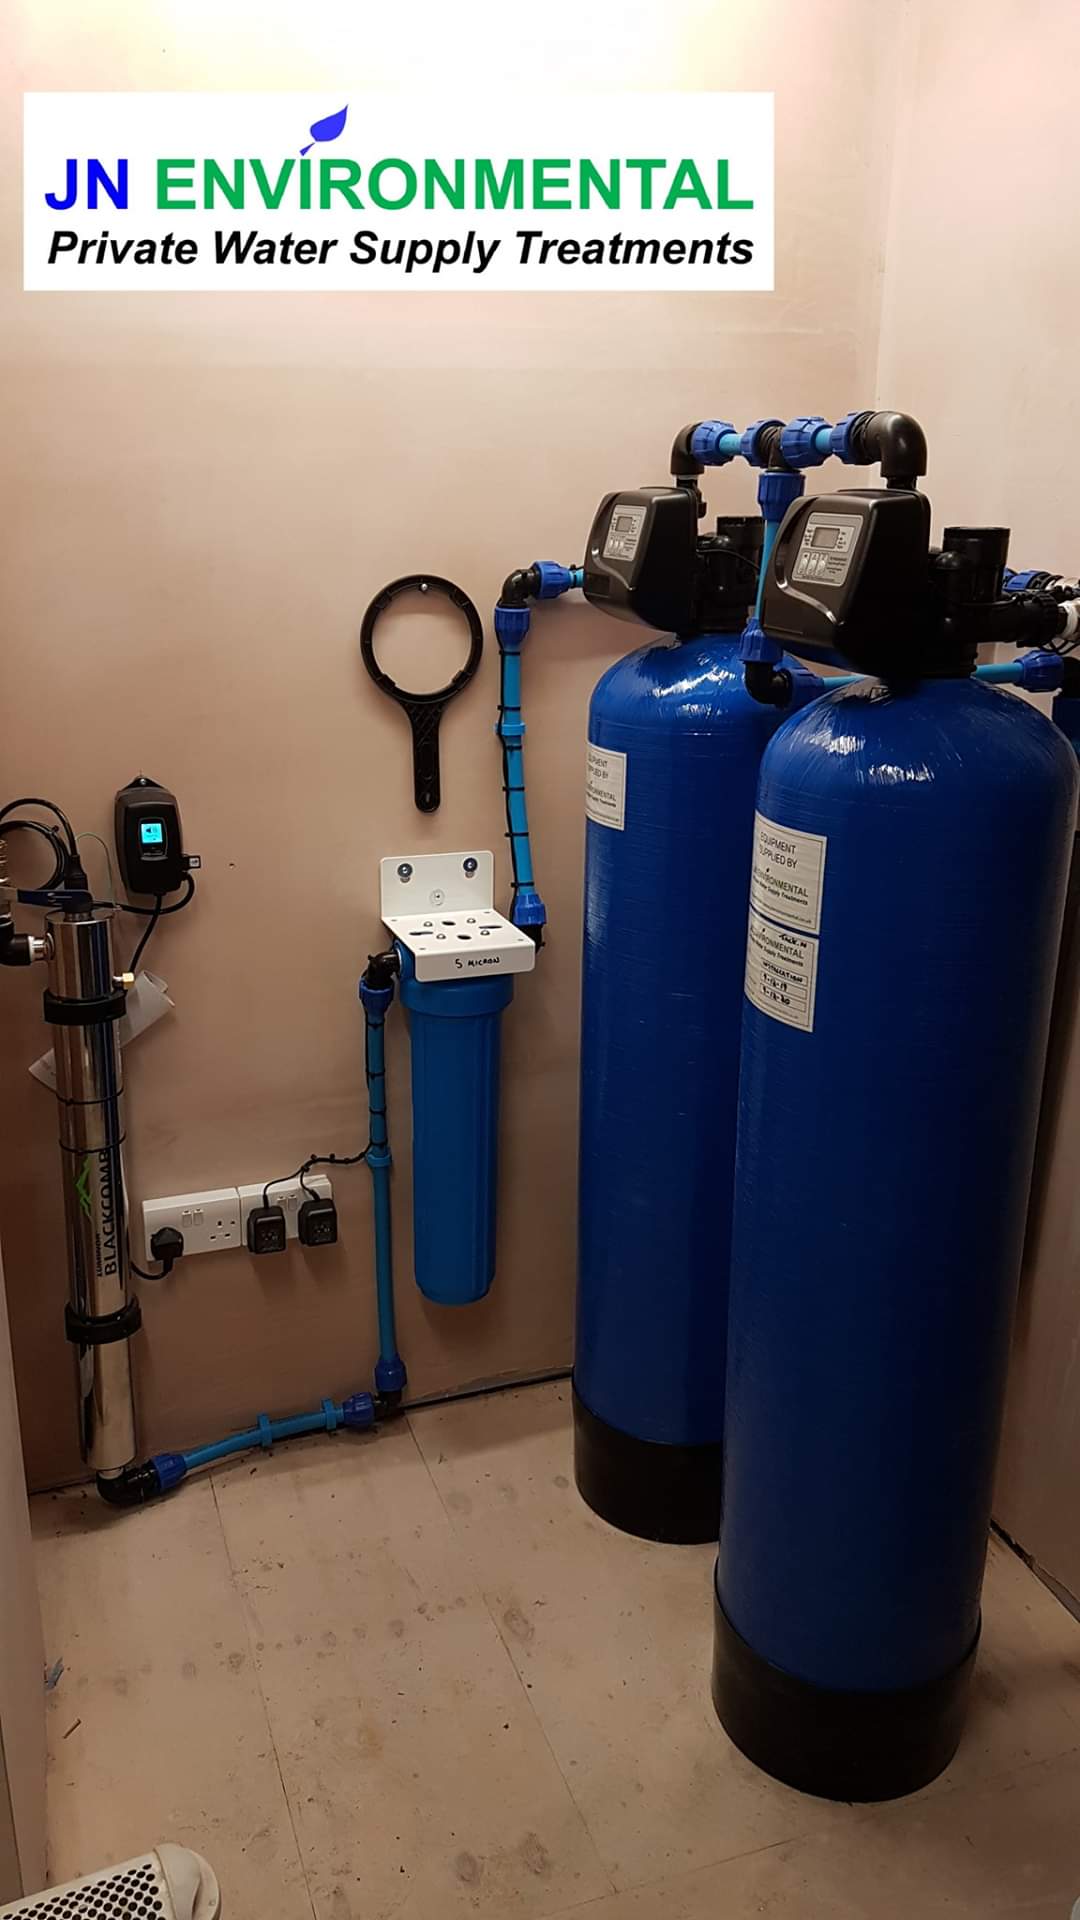 Private Water Supply Installation In Tal-y-Llyn, Wales